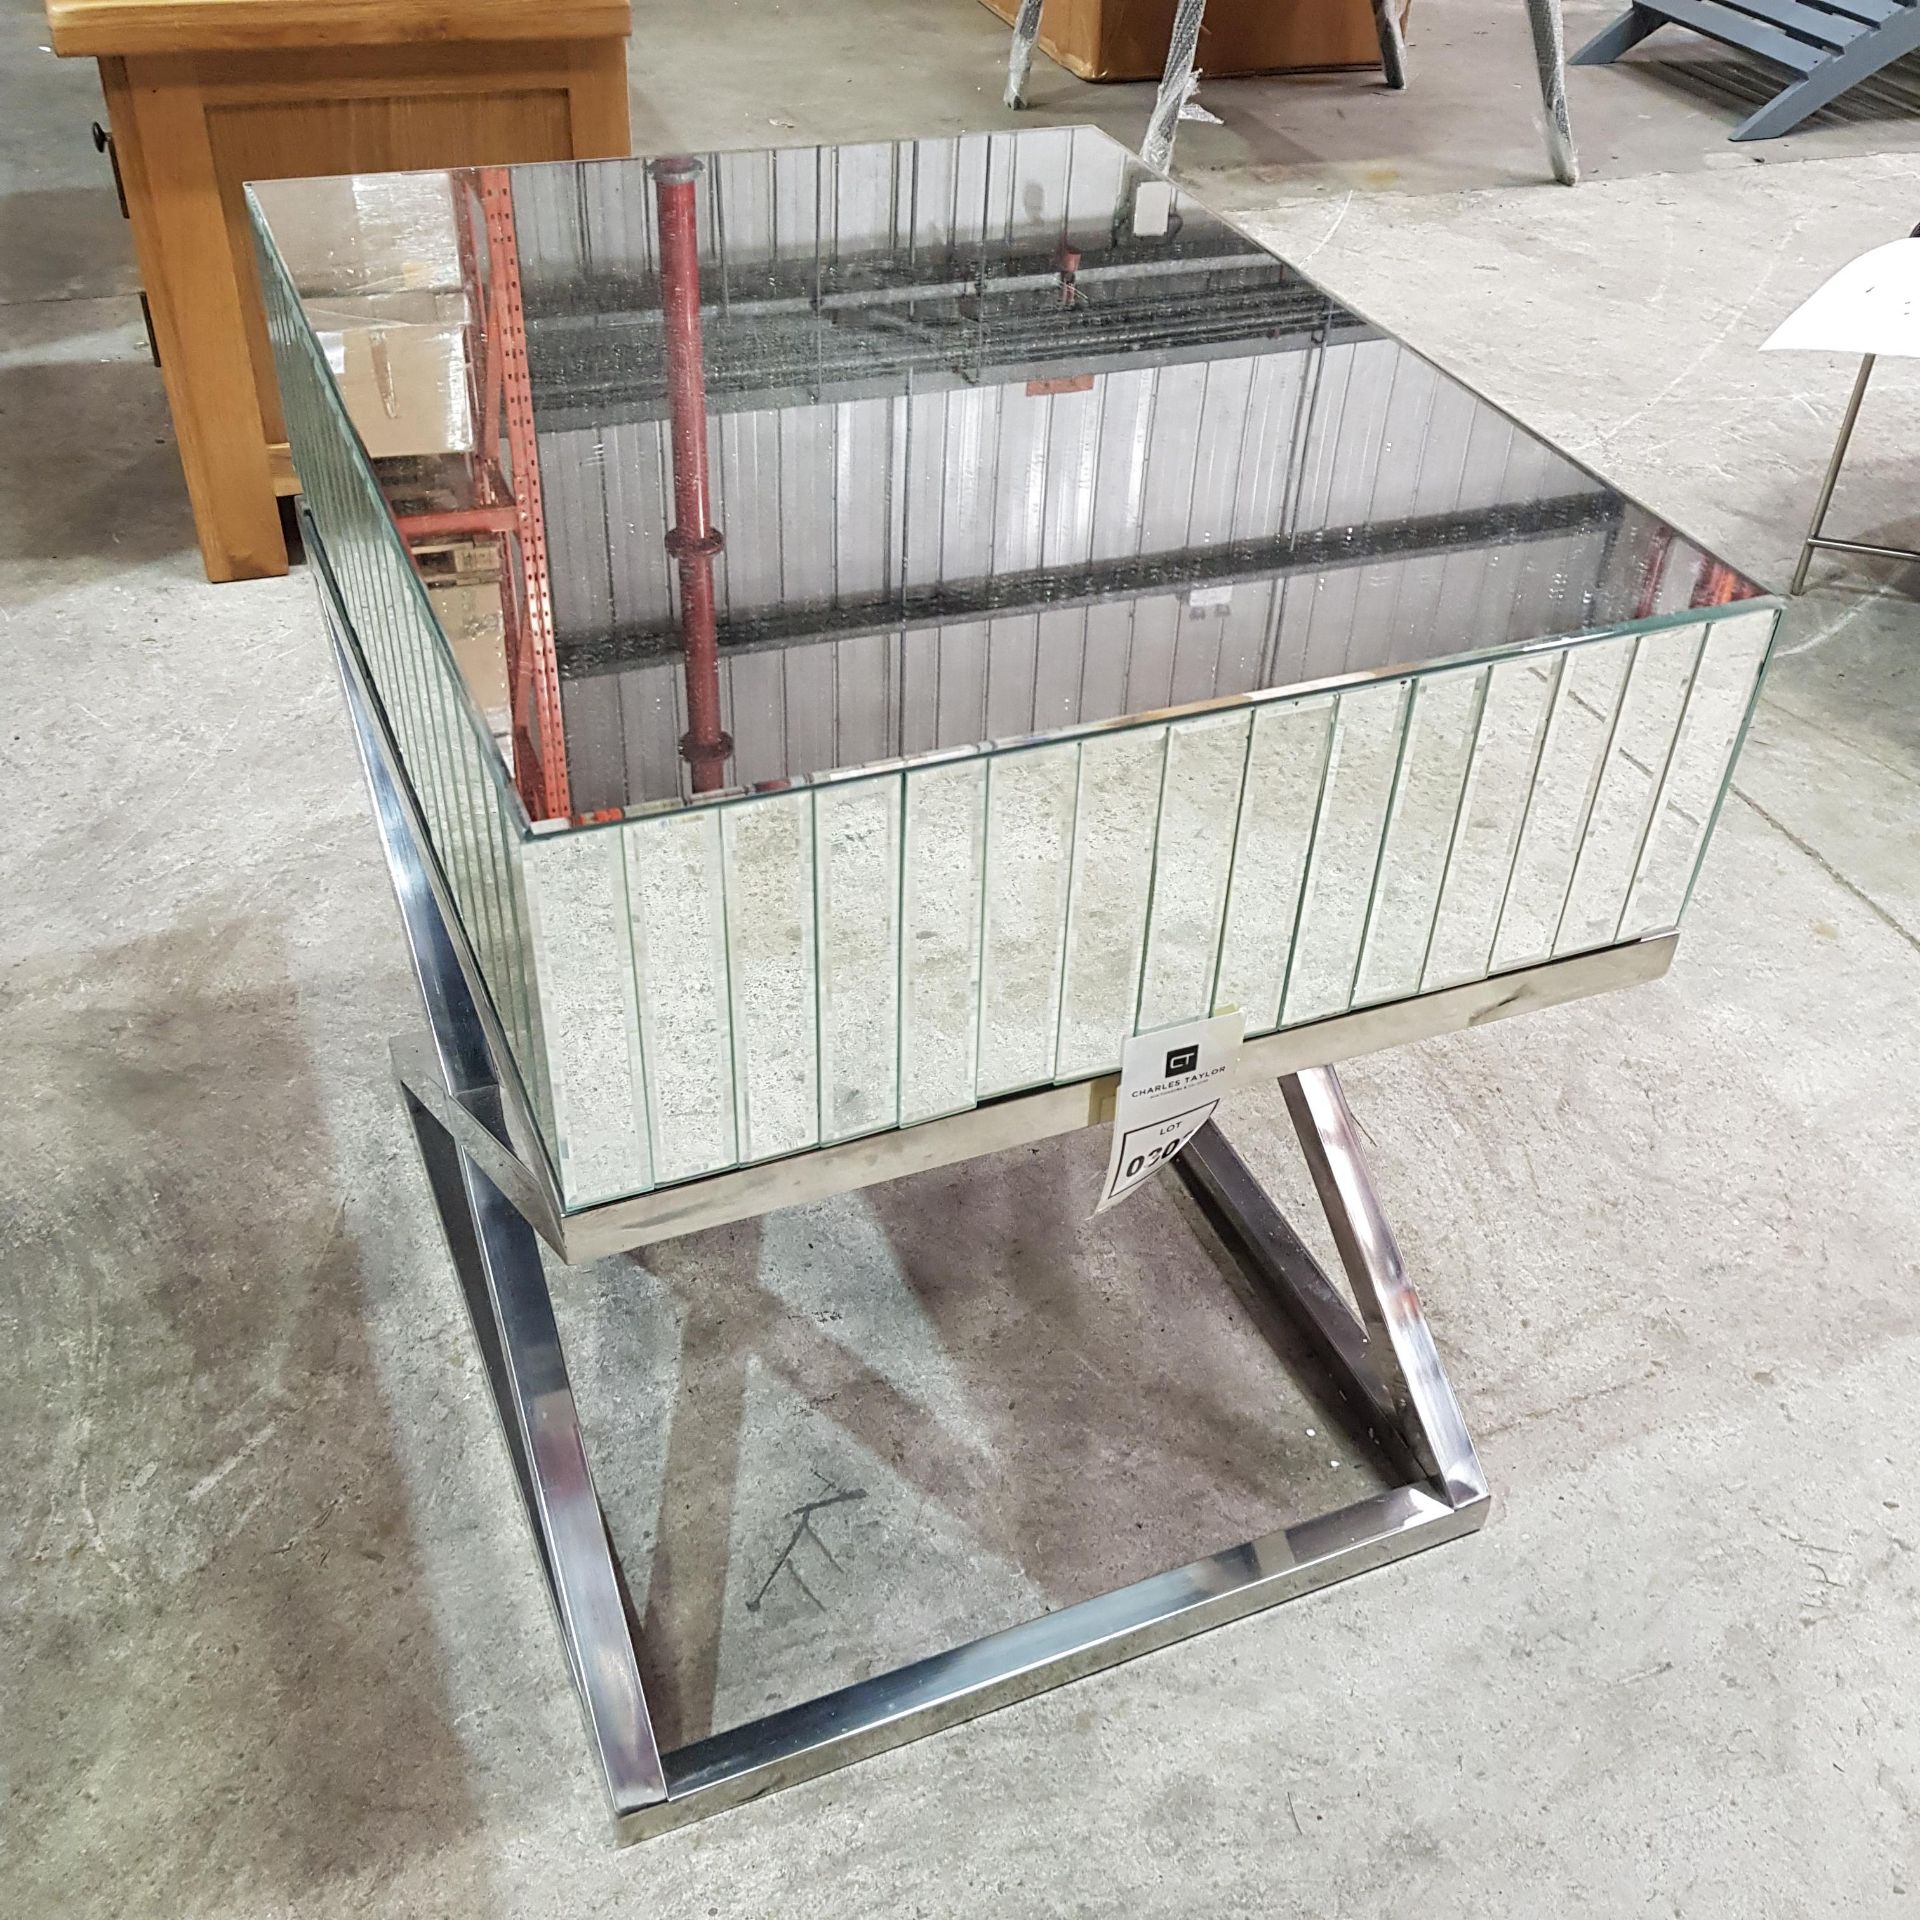 1 X BRAND NEW SIENNA X STYLE STAINLESS STEEL BASE MIRRORED SIDE TABLE ( L 60 CM X W 47 CM X H 58